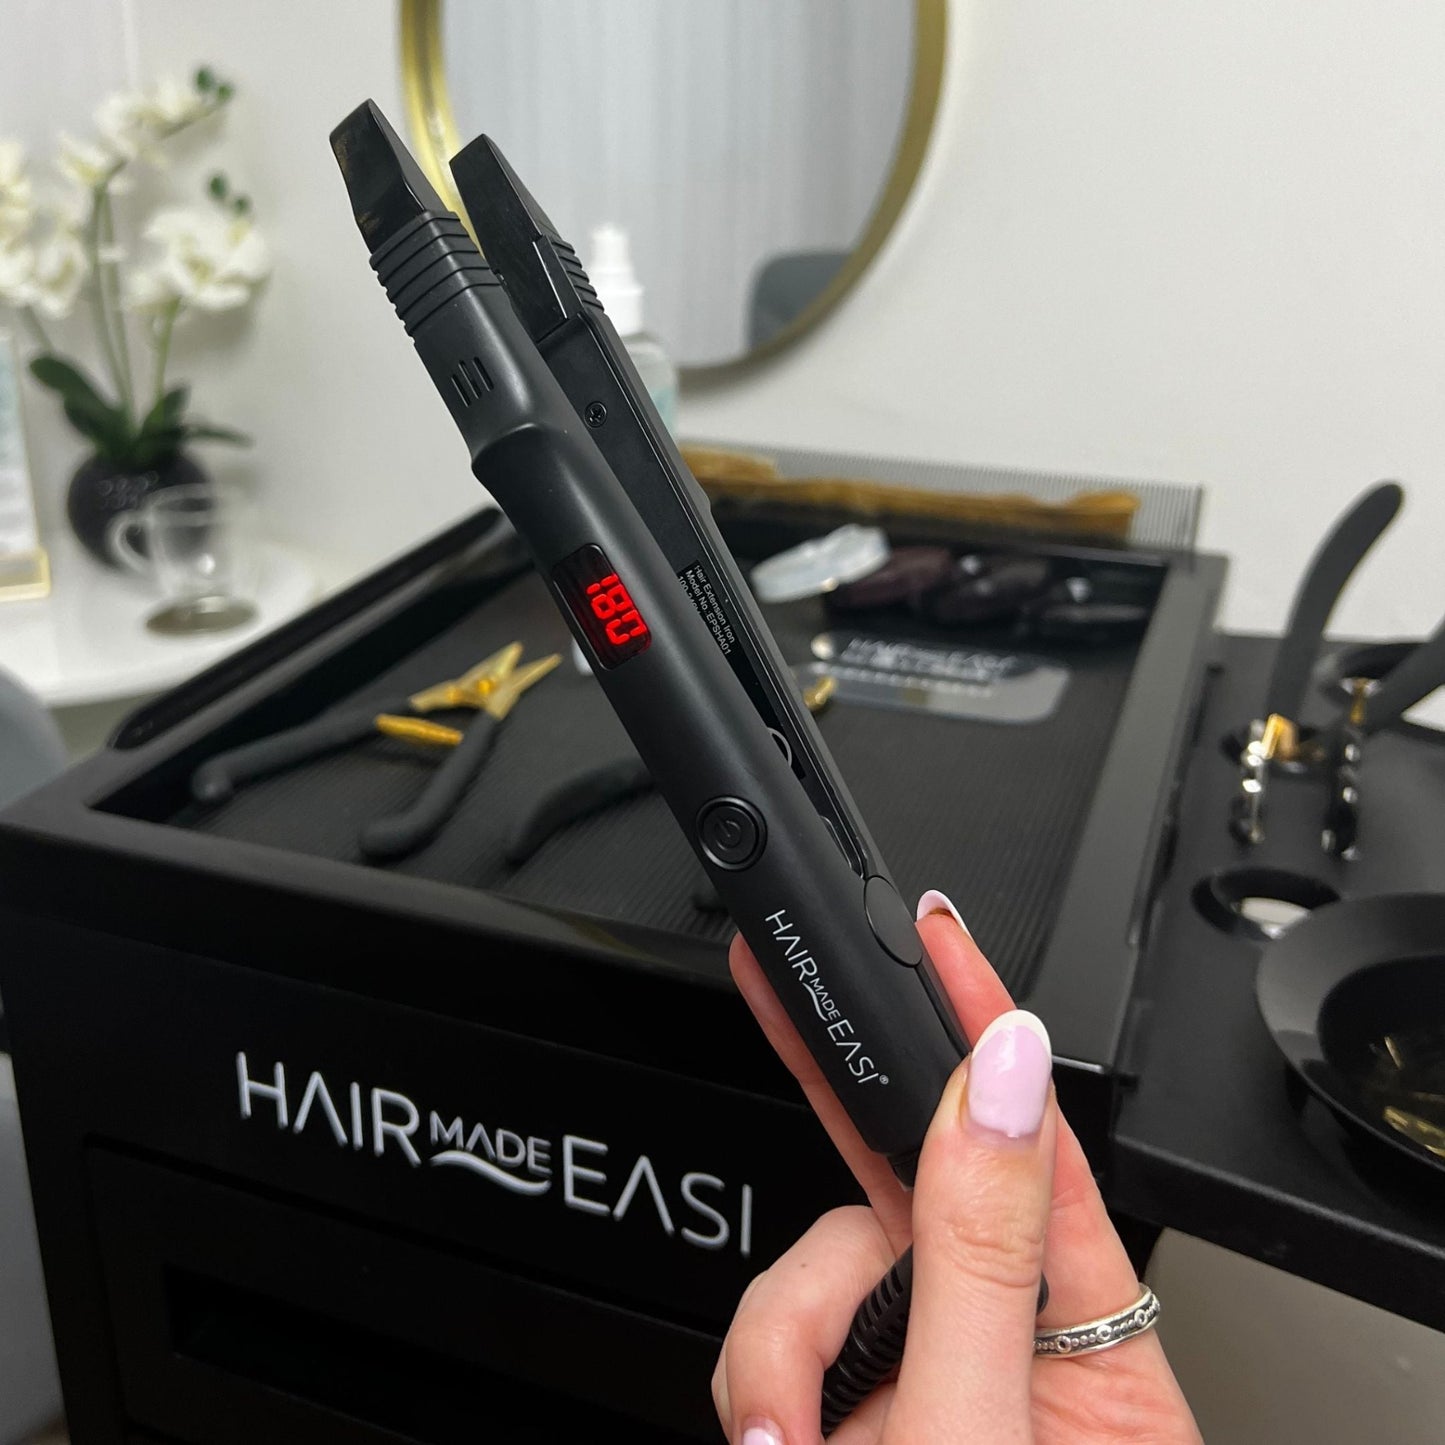 Fusion Bond Heat Applicator for Hair Extensions - Hair Made Easi